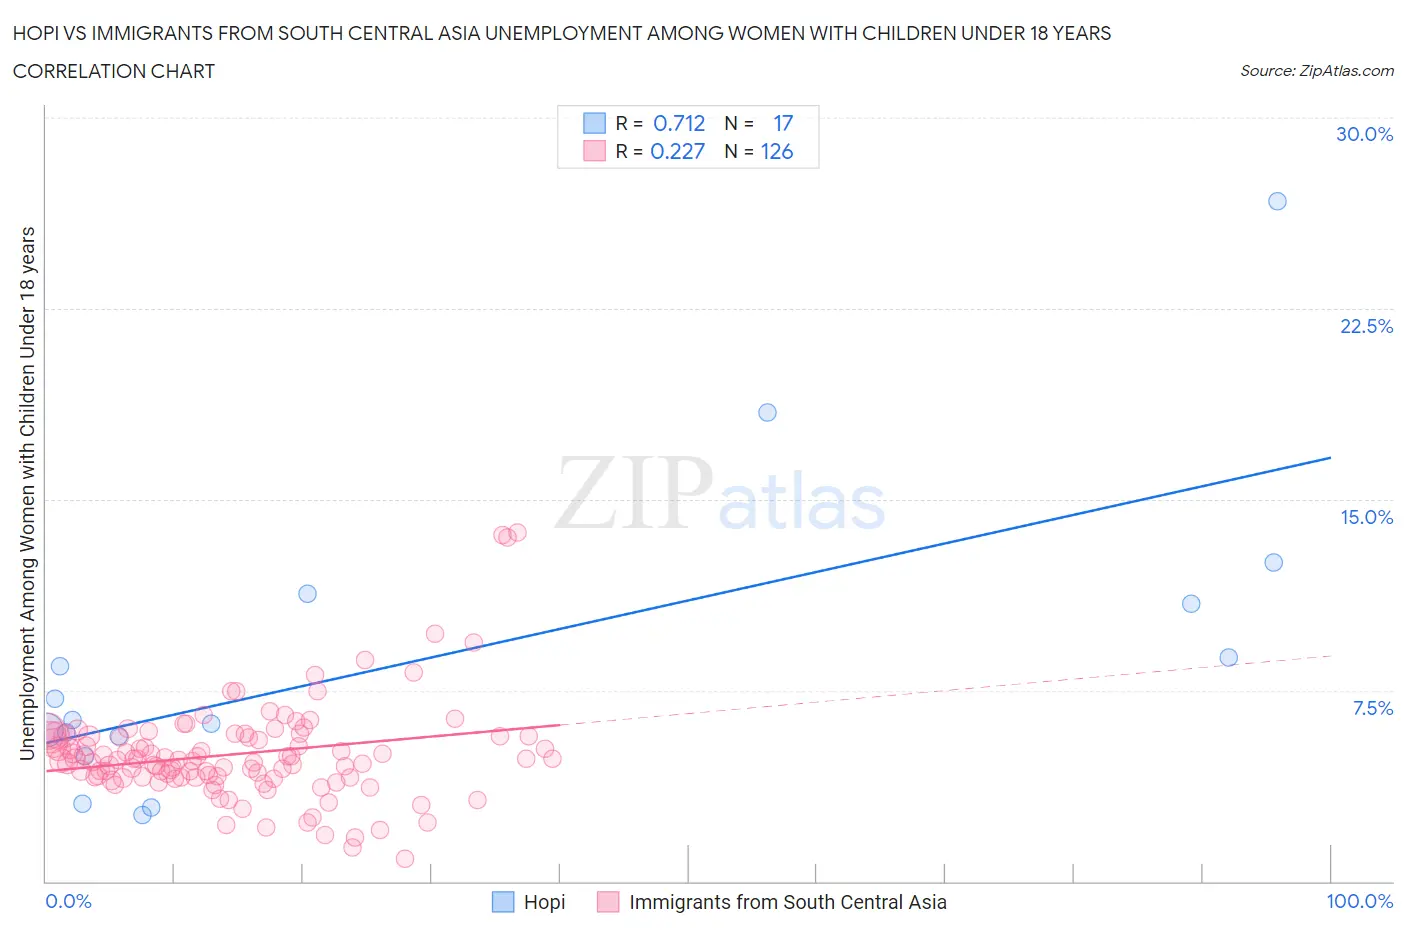 Hopi vs Immigrants from South Central Asia Unemployment Among Women with Children Under 18 years